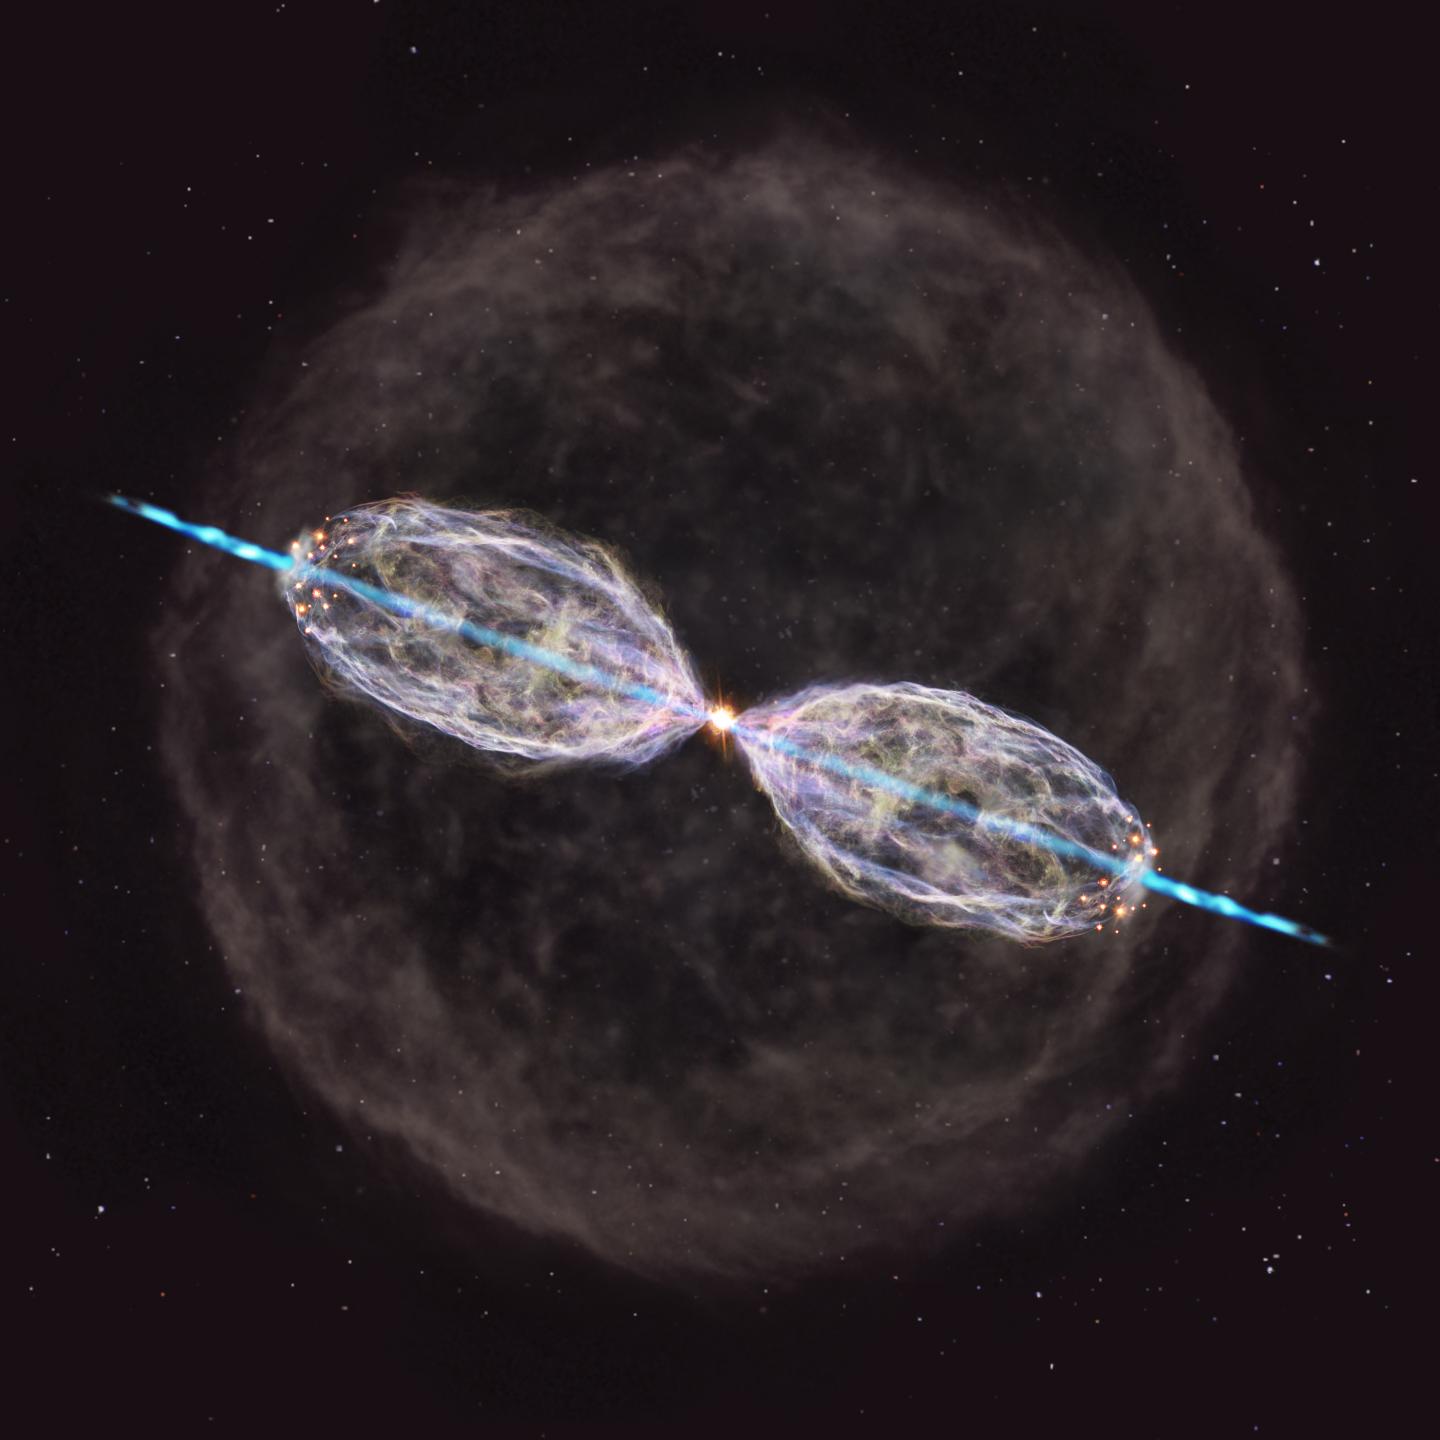 Artist's impression of W43A based on the ALMA observation results